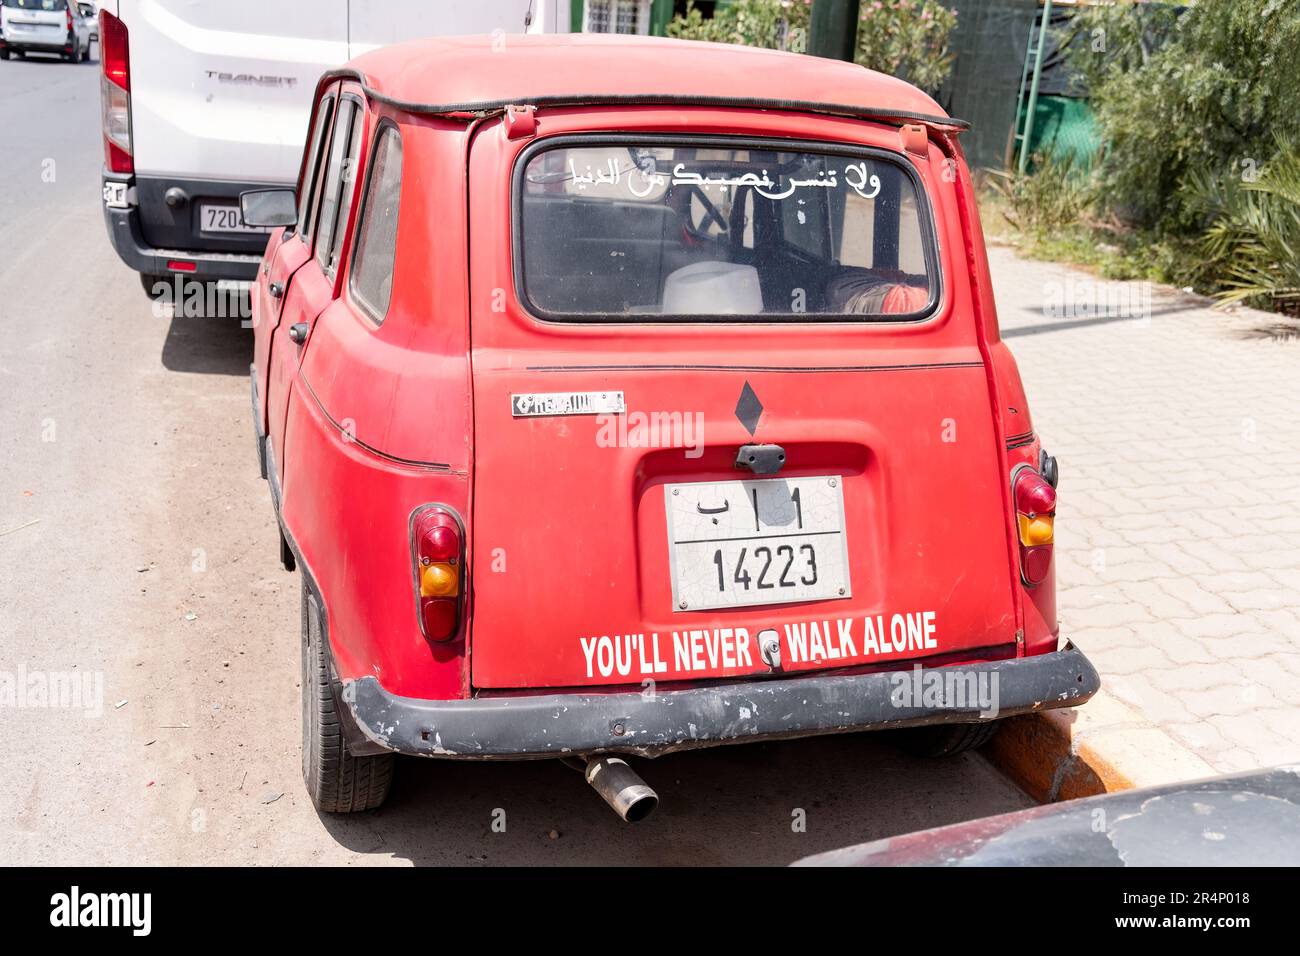 An old red Renault 4 motor vehicle parked on a street in Marrakesh, Morocco. The car has the slogan You'll Never Walk Alone written across its boot Stock Photo